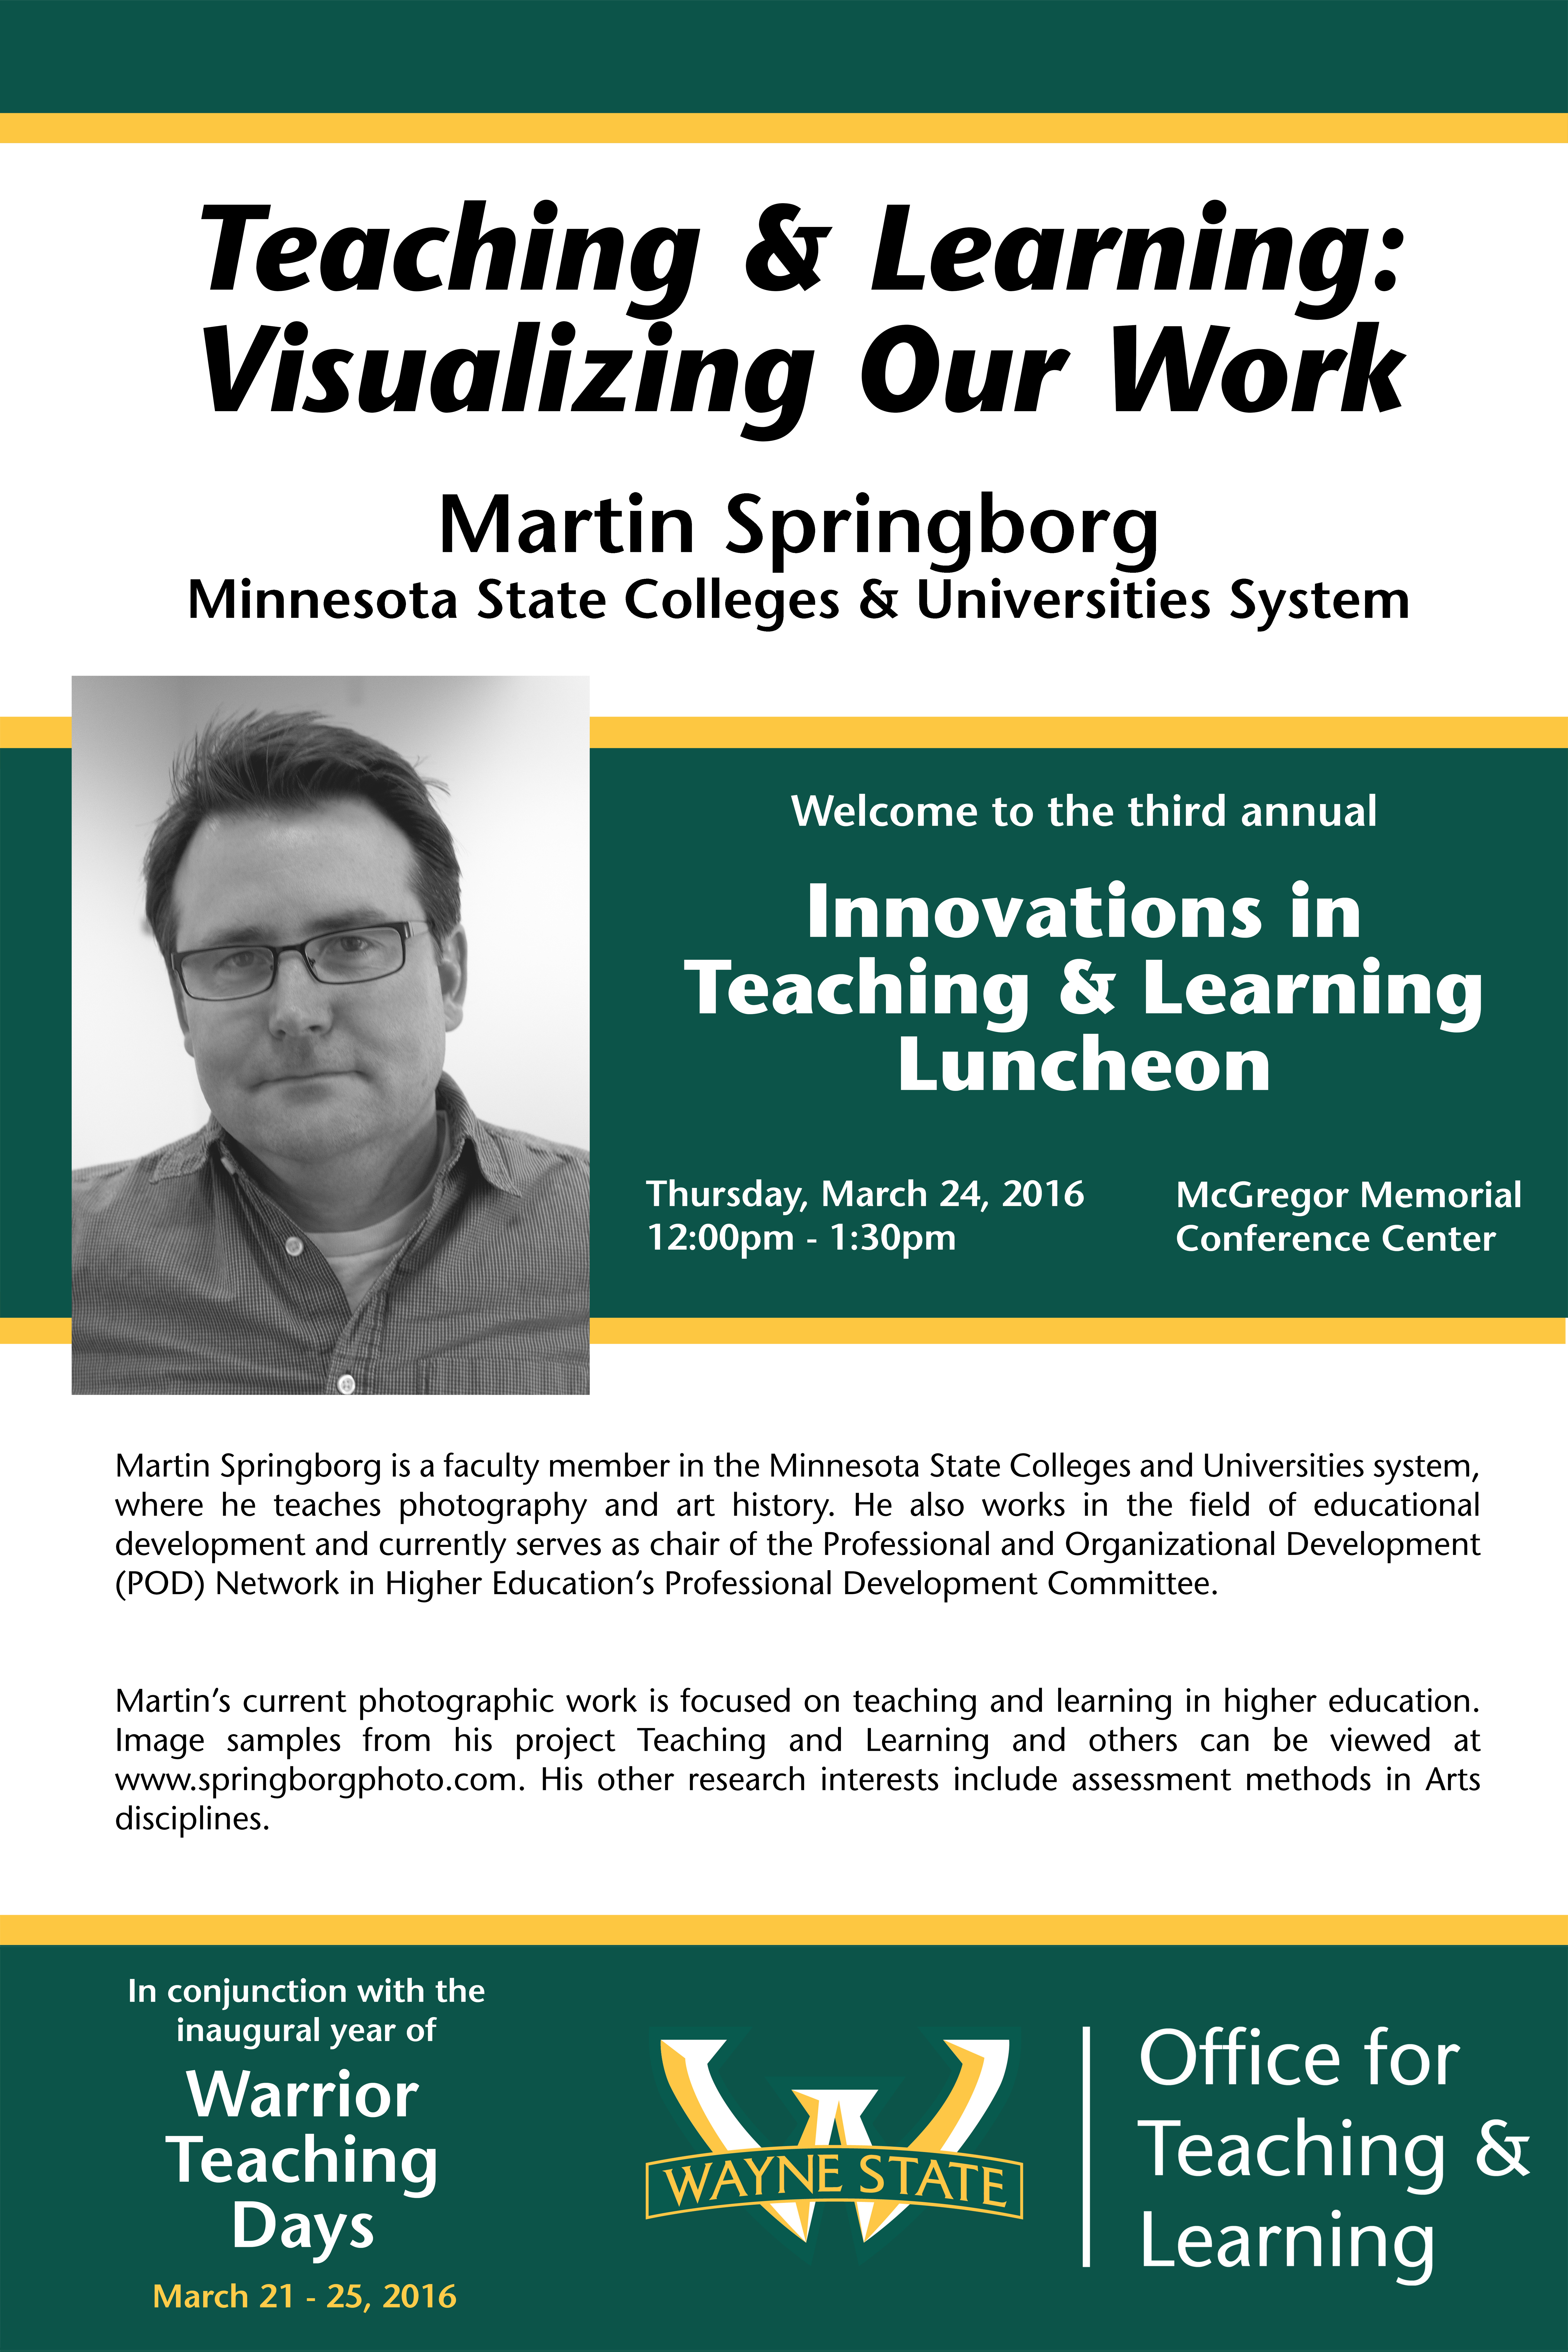 Flyer for Martin Springborg, Keynote Speaker at the 2016 WSU Innovations in Teaching & Learning Luncheon on March 24, 2016, with a talk entitled Teaching & Learning: Visualizing Our Work sponsored by the Office for Teaching & Learning